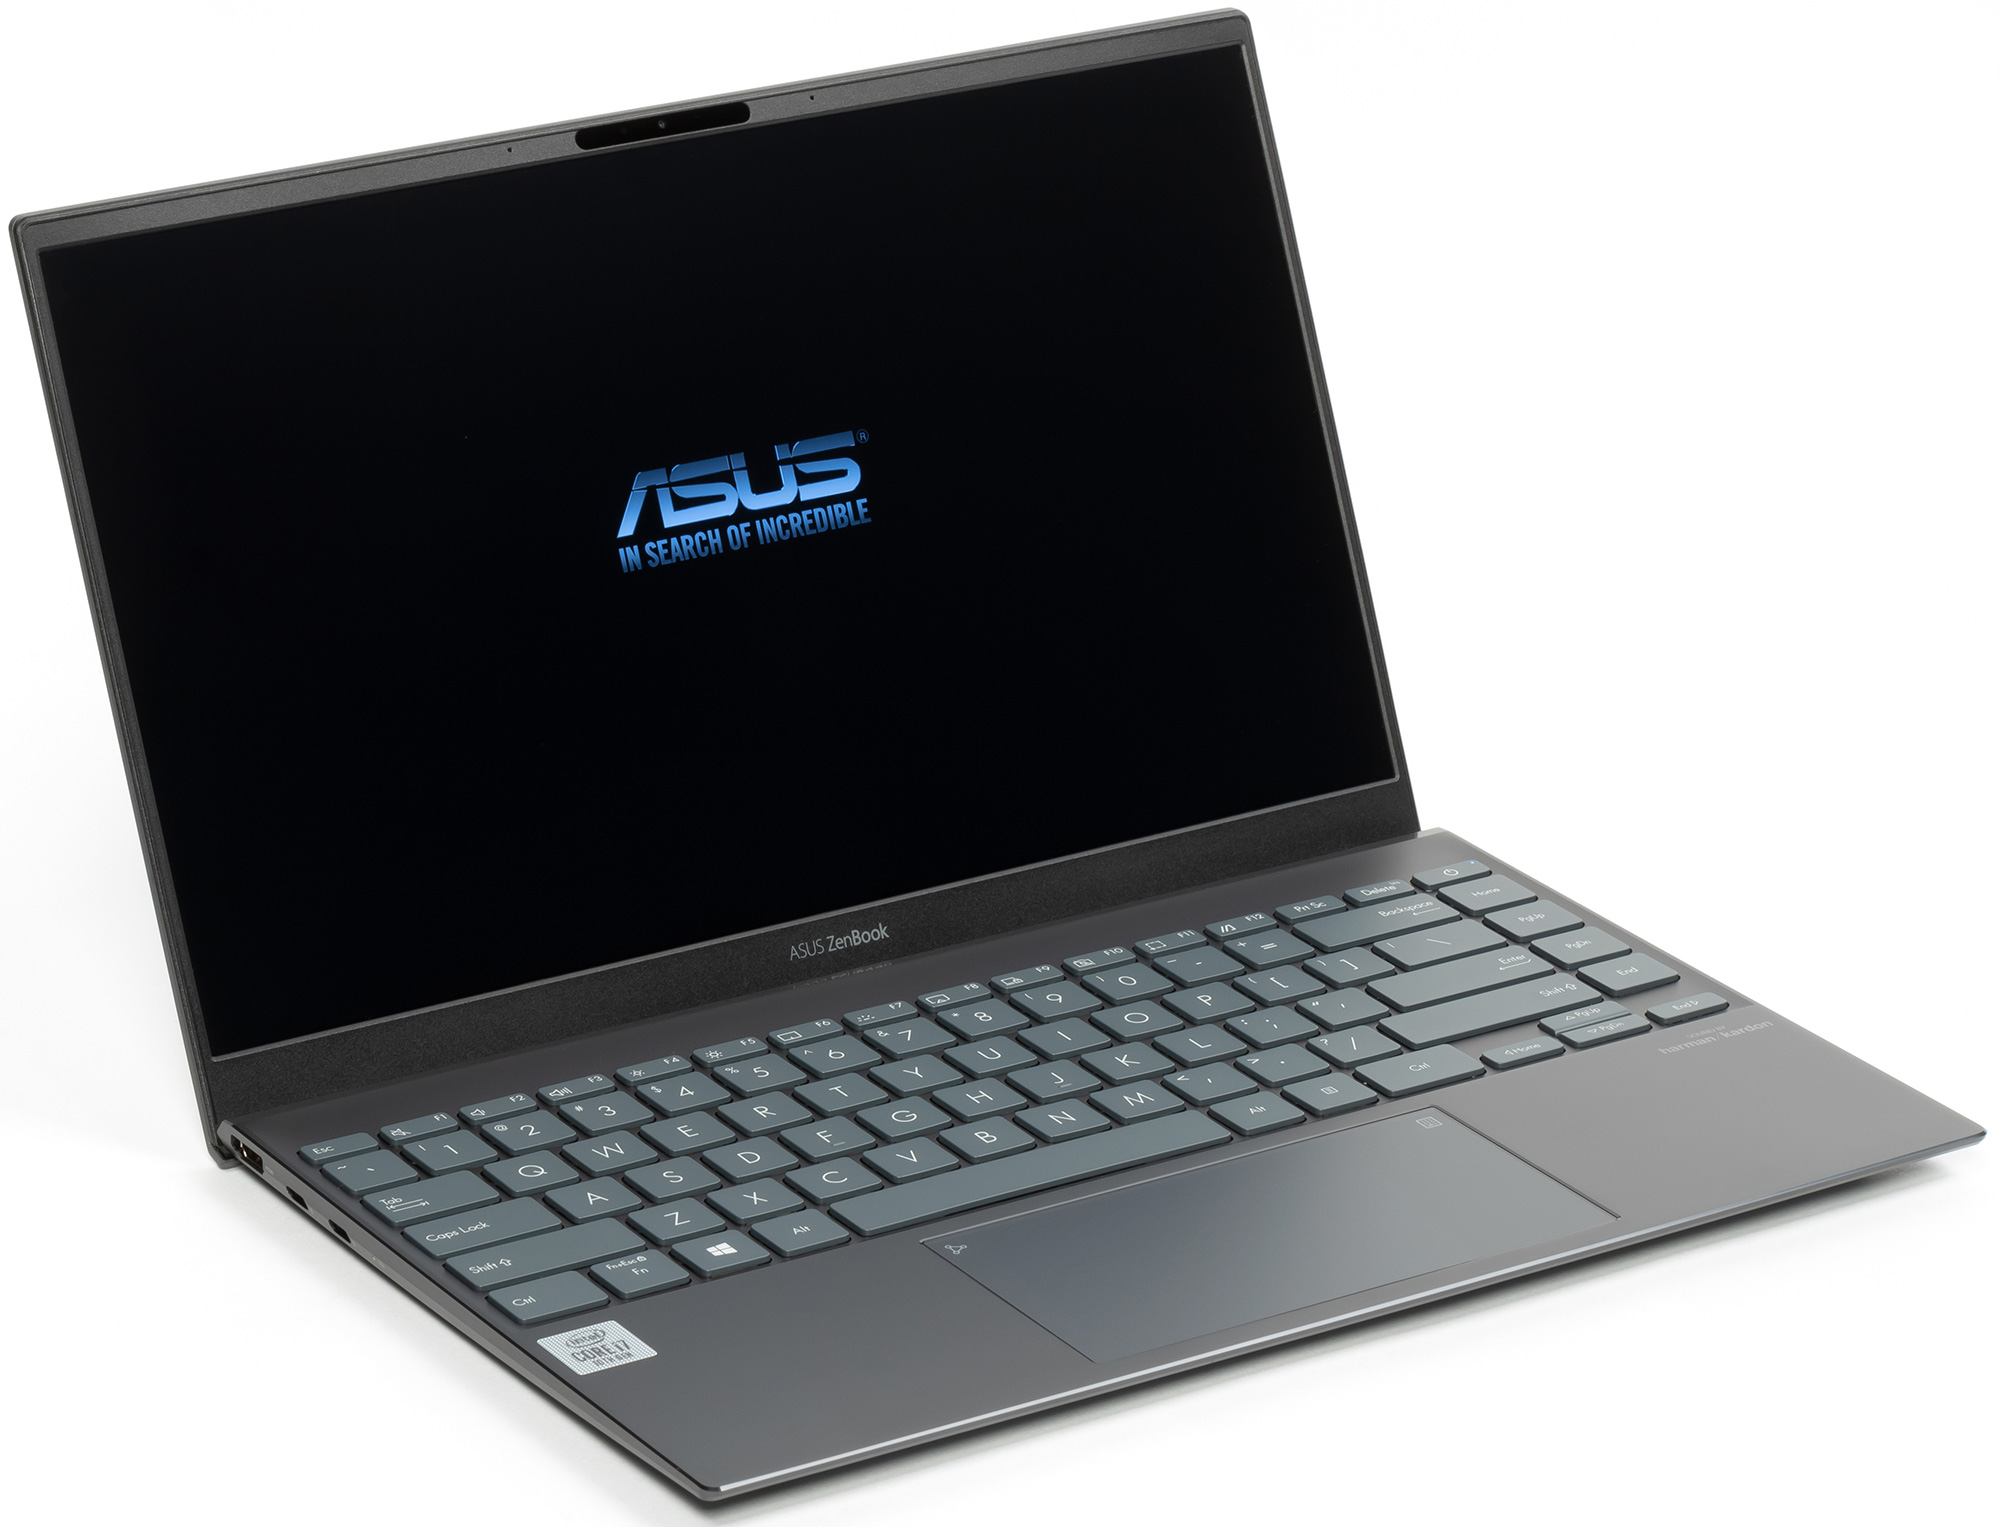 Asus zenbook 5. ASUS ZENBOOK ux425. ZENBOOK 14 ux425. Ноутбук ASUS ZENBOOK 14 ux425. ASUS ZENBOOK 14 ux425ea (ux425ea-hm039t).